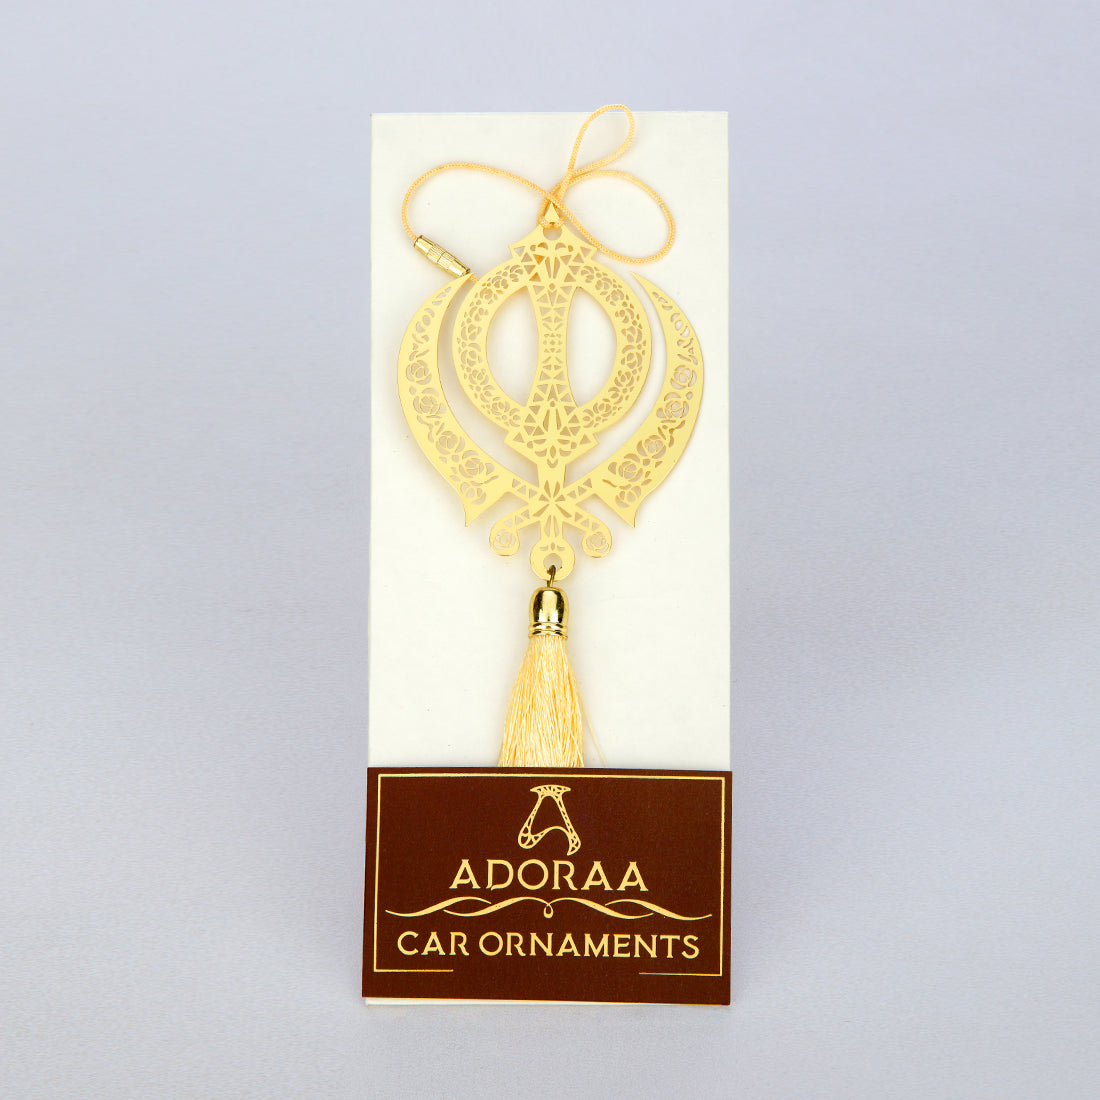 Khanda Punjabi Sikh Hanging Accessories for Car rear view mirror Décor in Brass